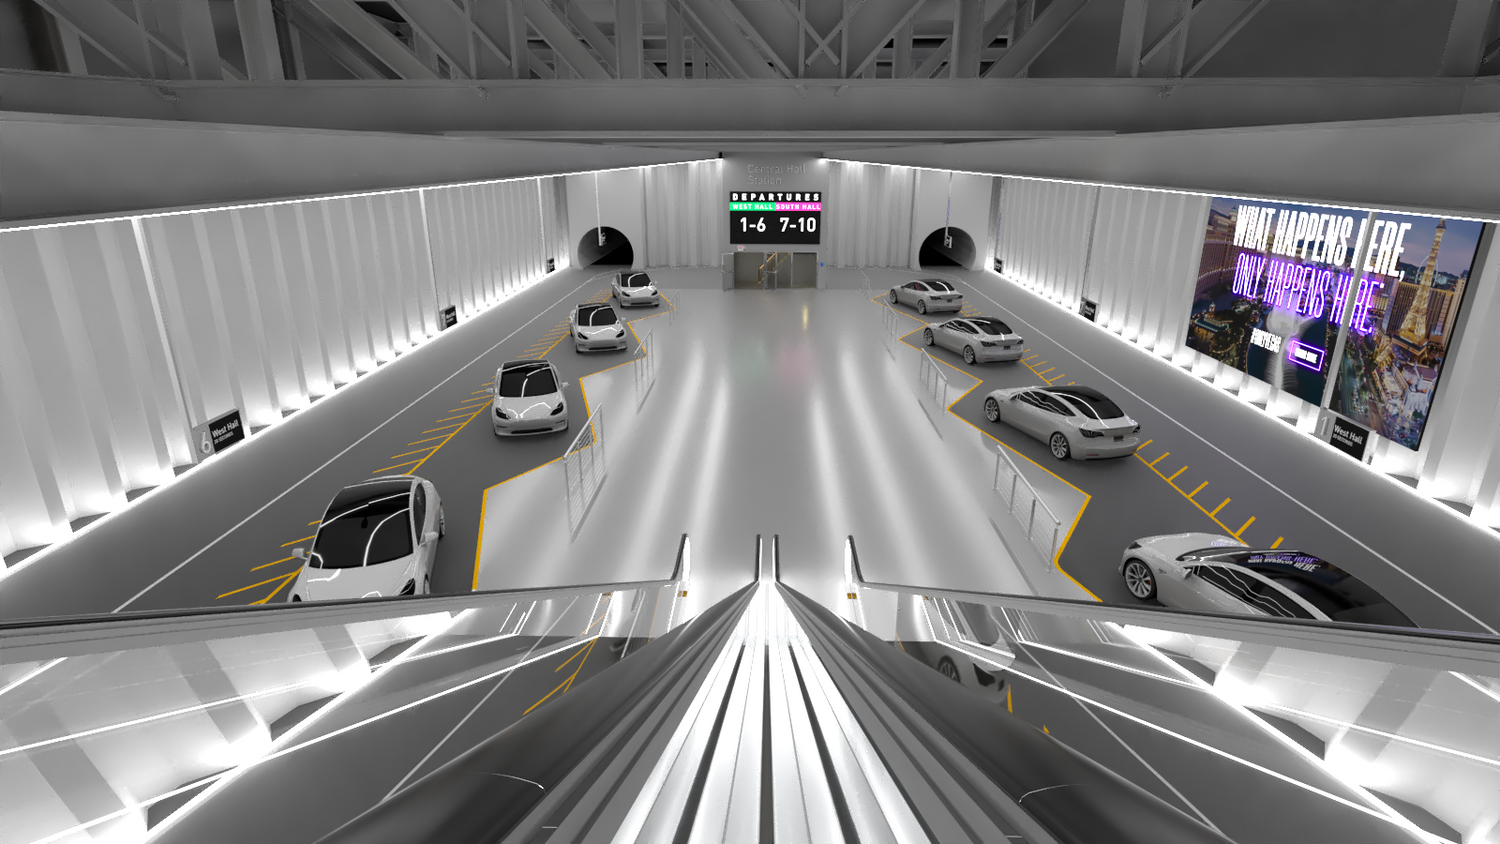 New The Boring Company renders suggest the Las Vegas Convention Center Loop will use Tesla vehicles underground